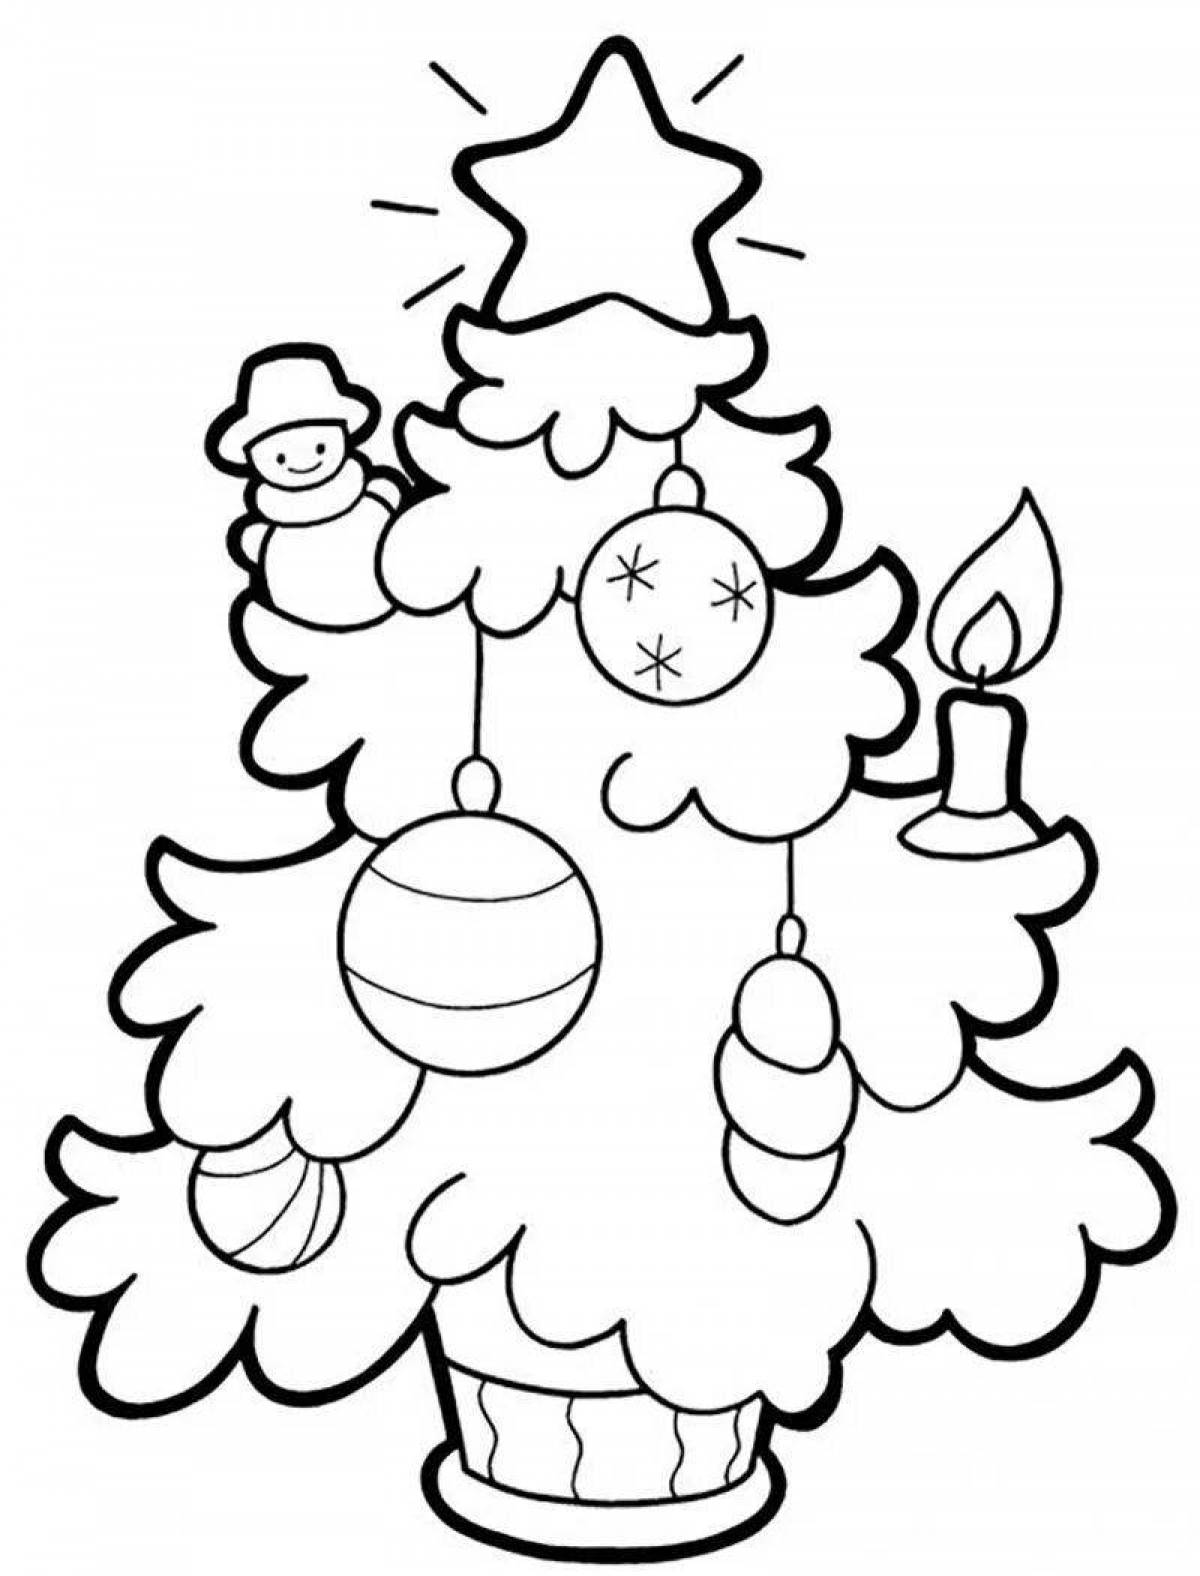 Bright Christmas coloring book for the little ones